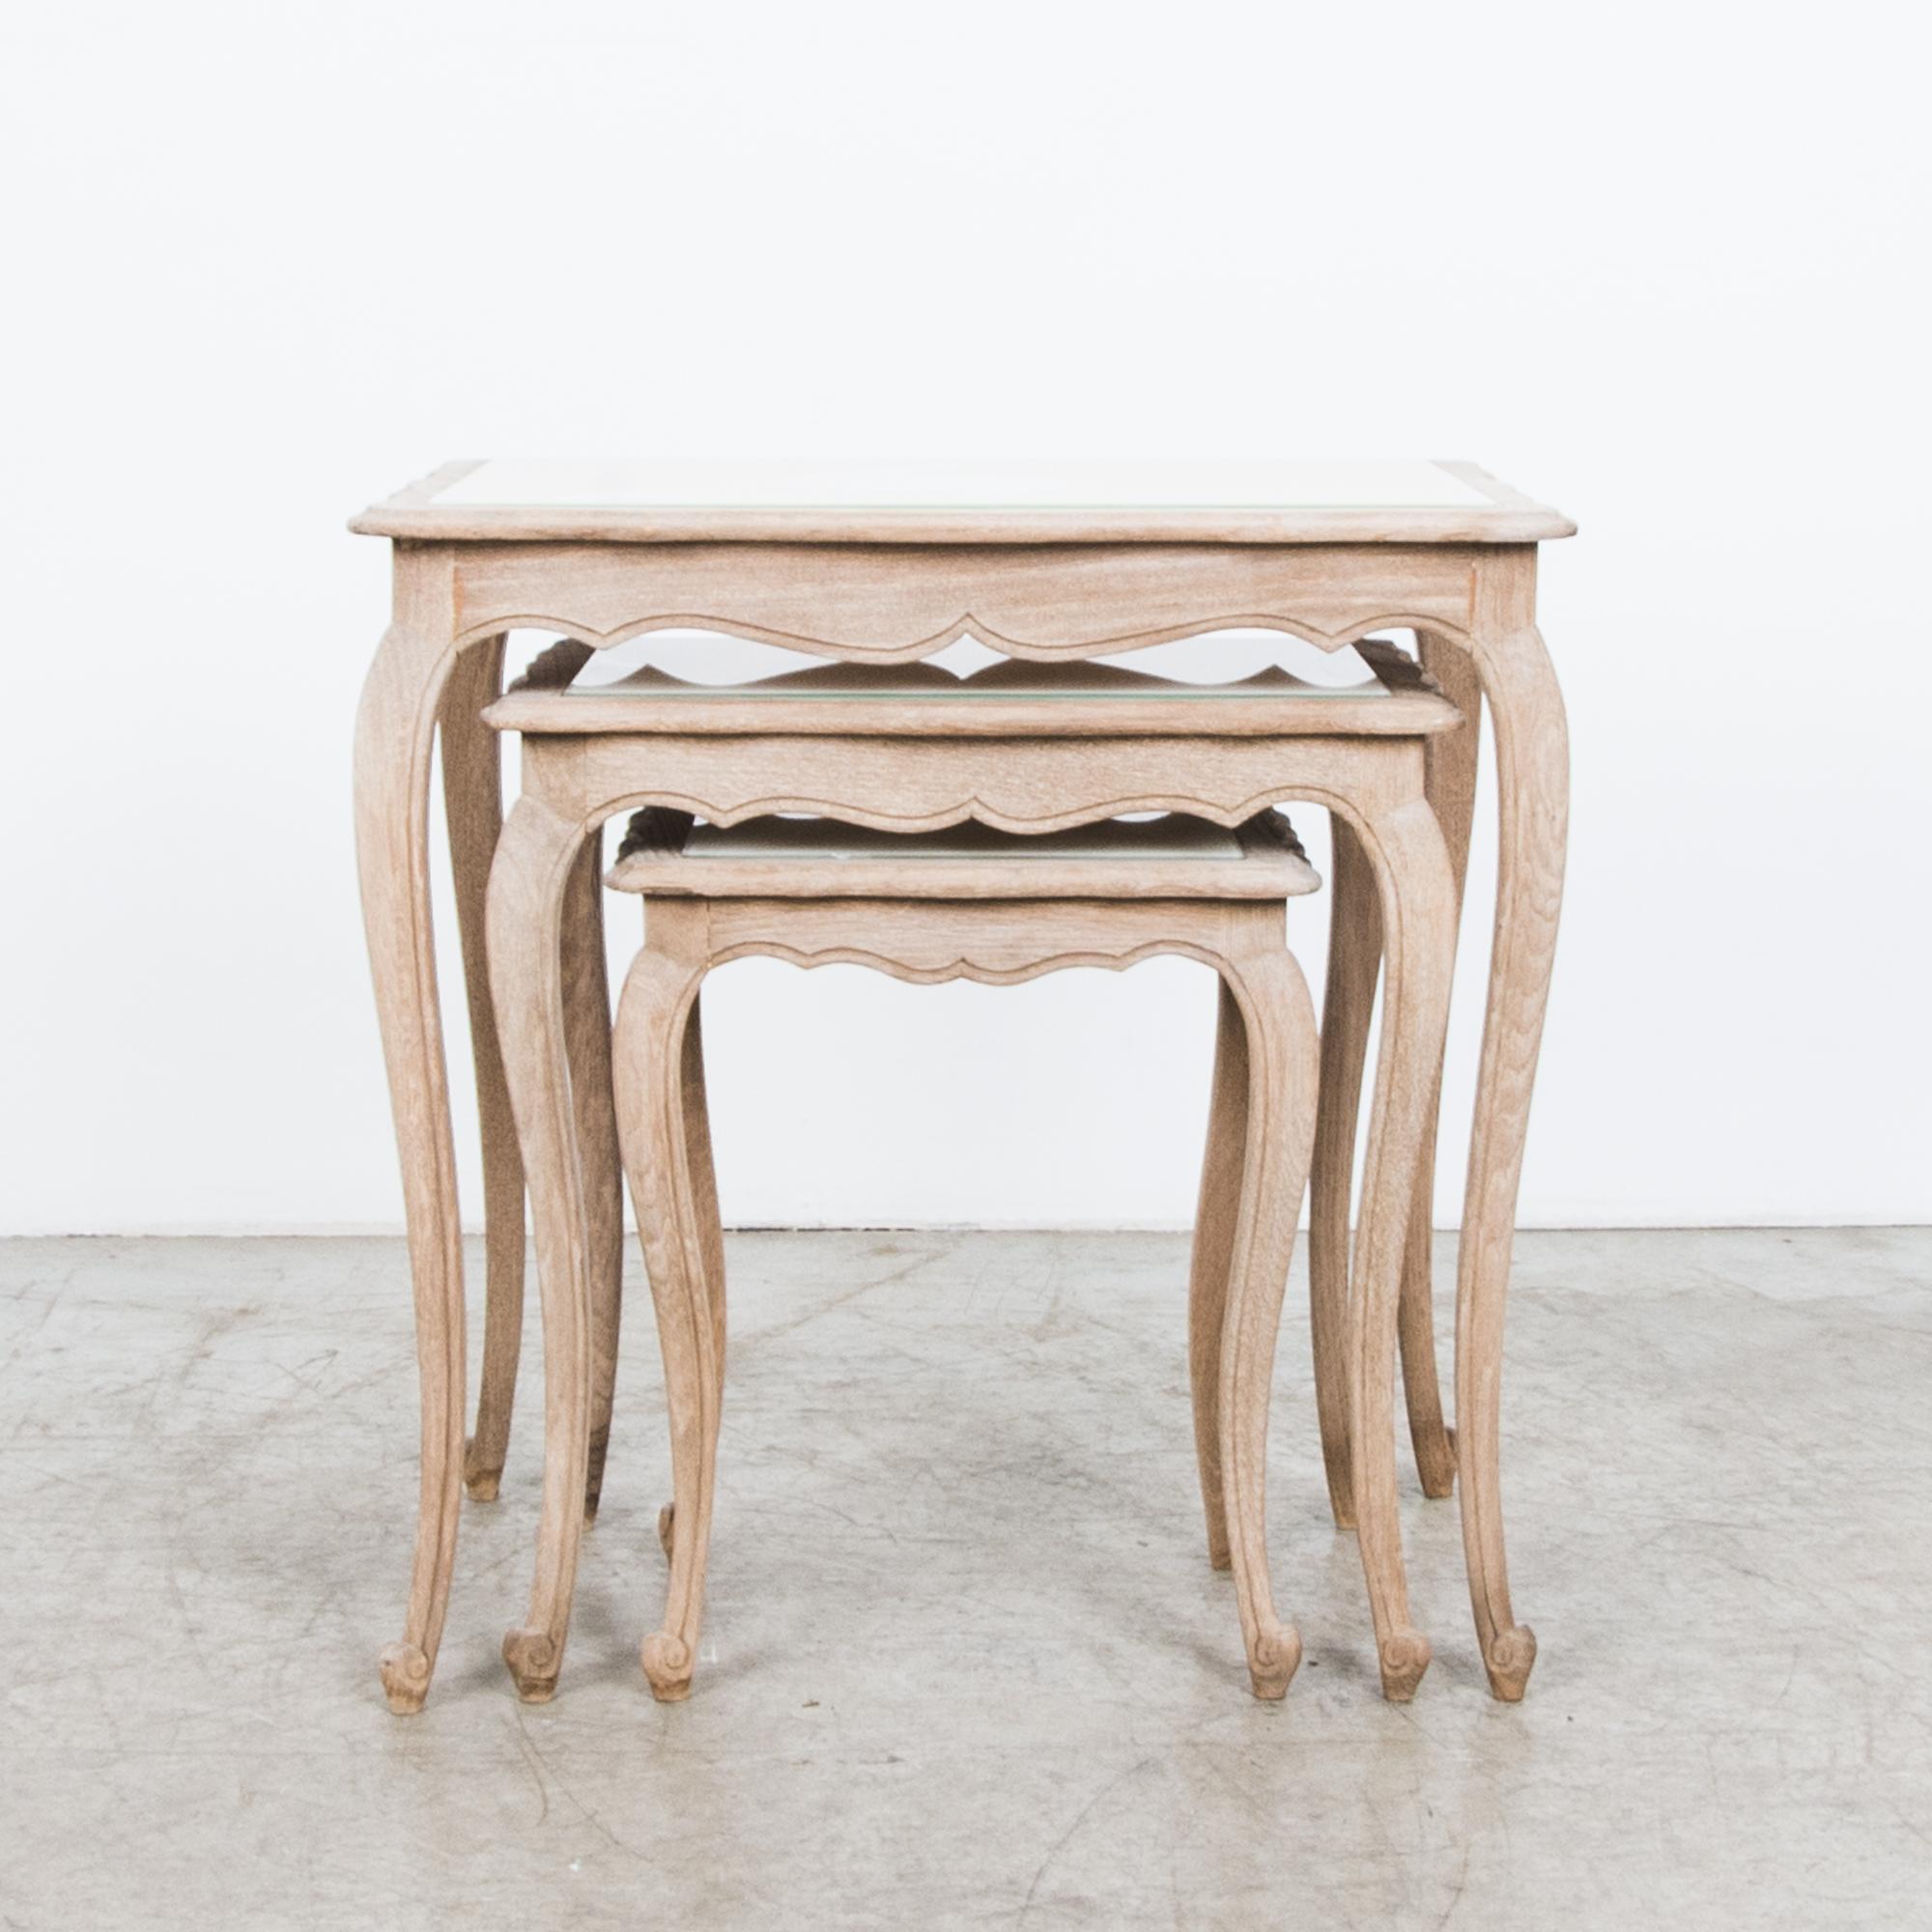 This set of three nesting tables from Belgium, circa 1950, combines oak with a white milk glass tabletop. Cabriole legs, a gently tapering tabletop profile and an elegant apron create a romantic silhouette, artfully updated by the light finish of